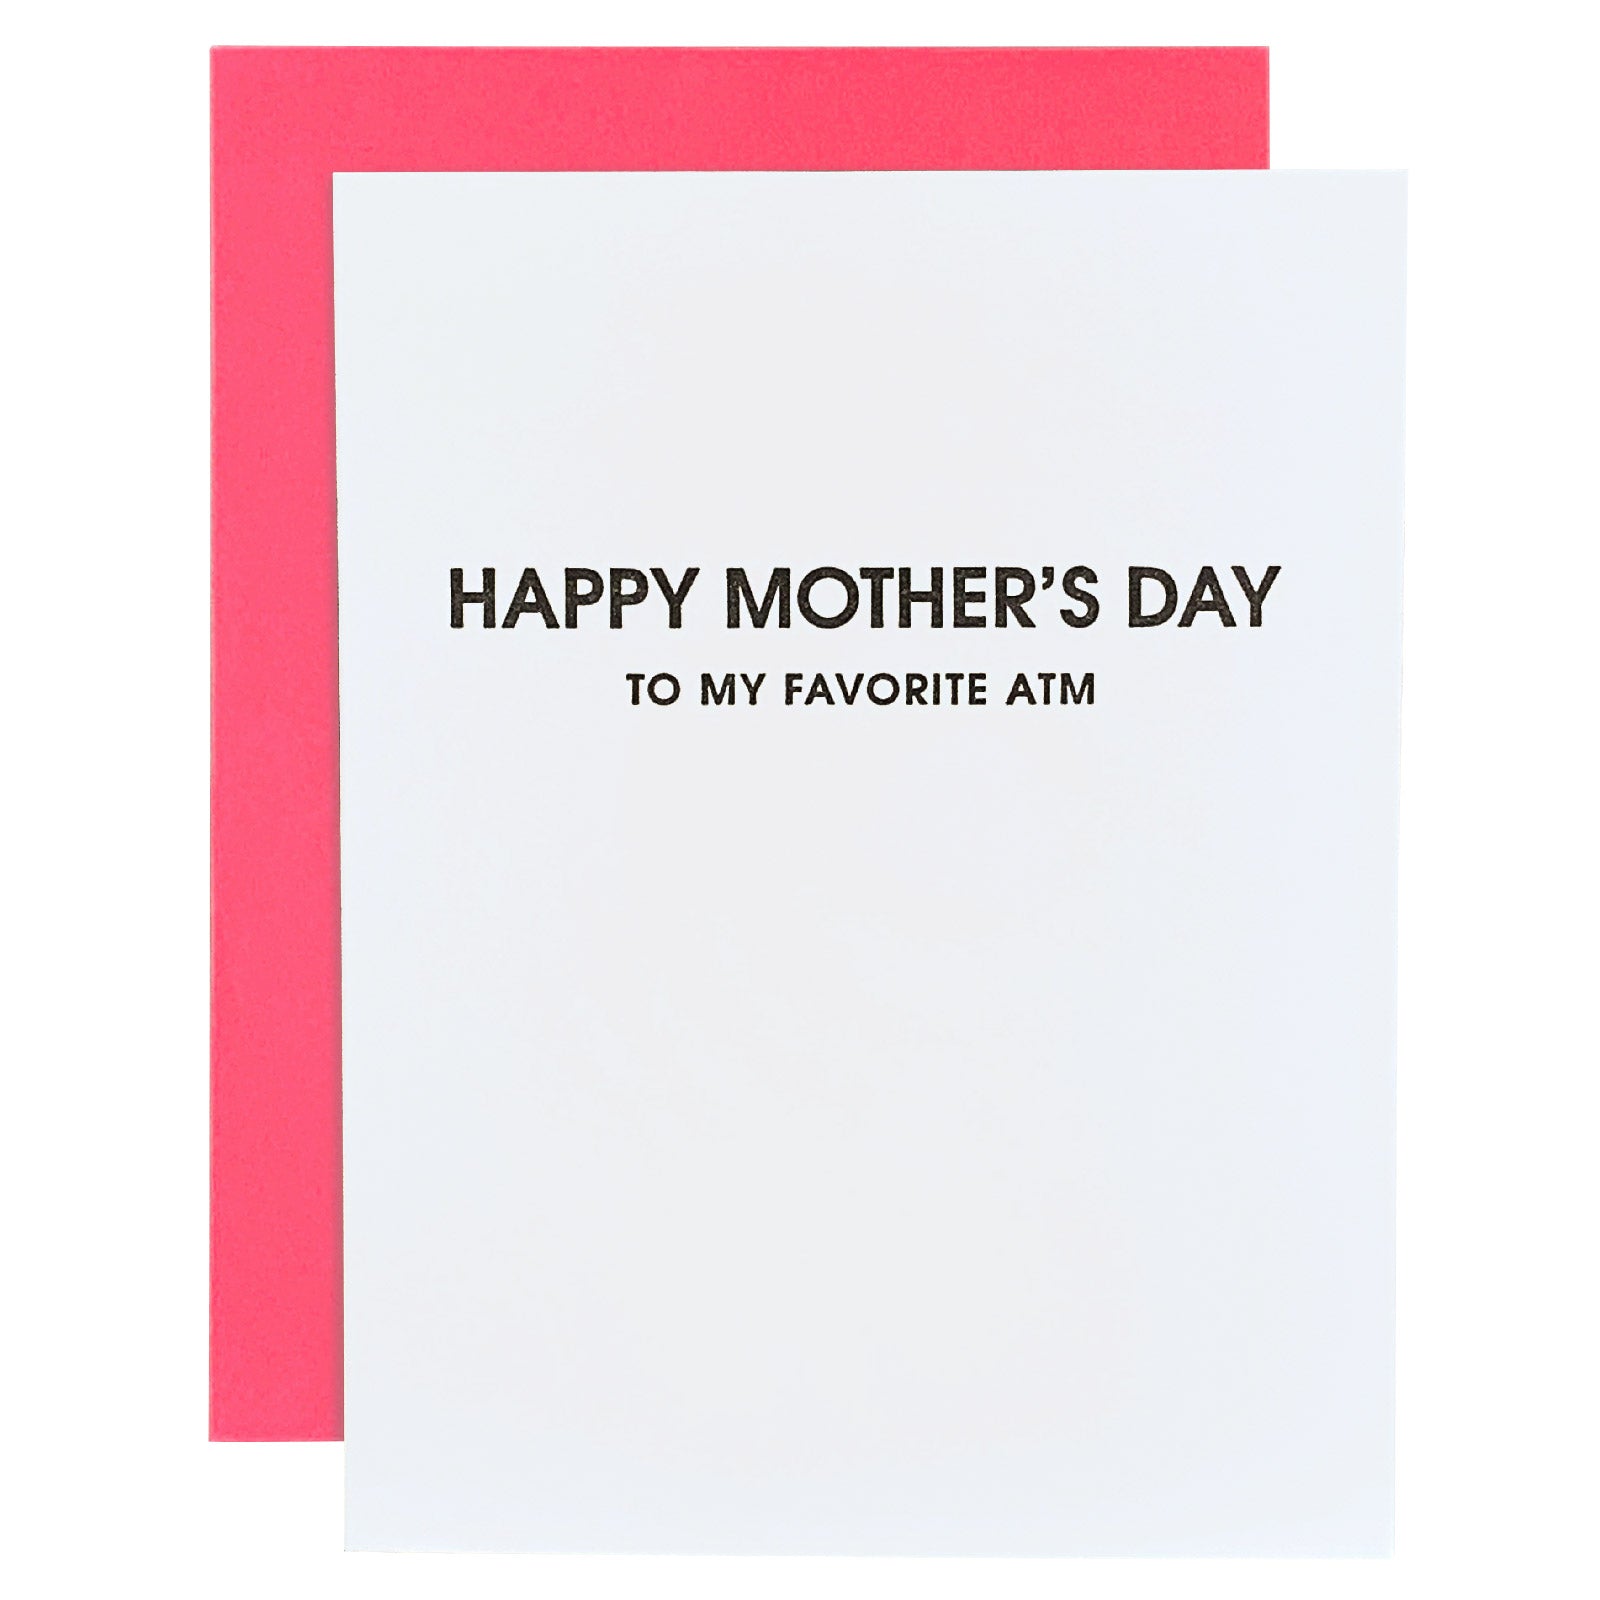 My Favorite ATM - Mother's Day Letterpress Card